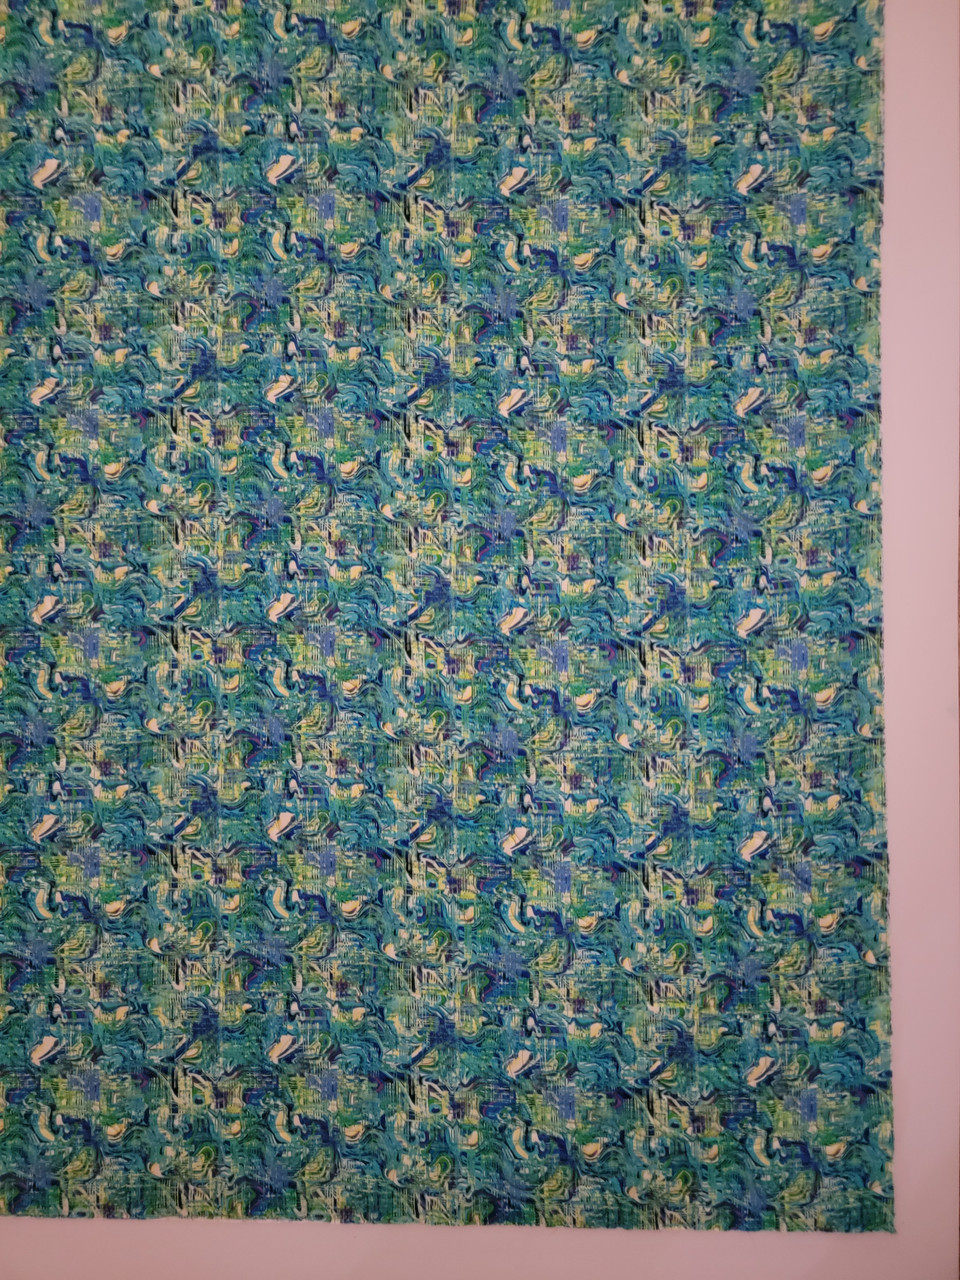 Quilted Fabric Studio E Prints Geofetti II Teal & Greens, 1-1/2 yards